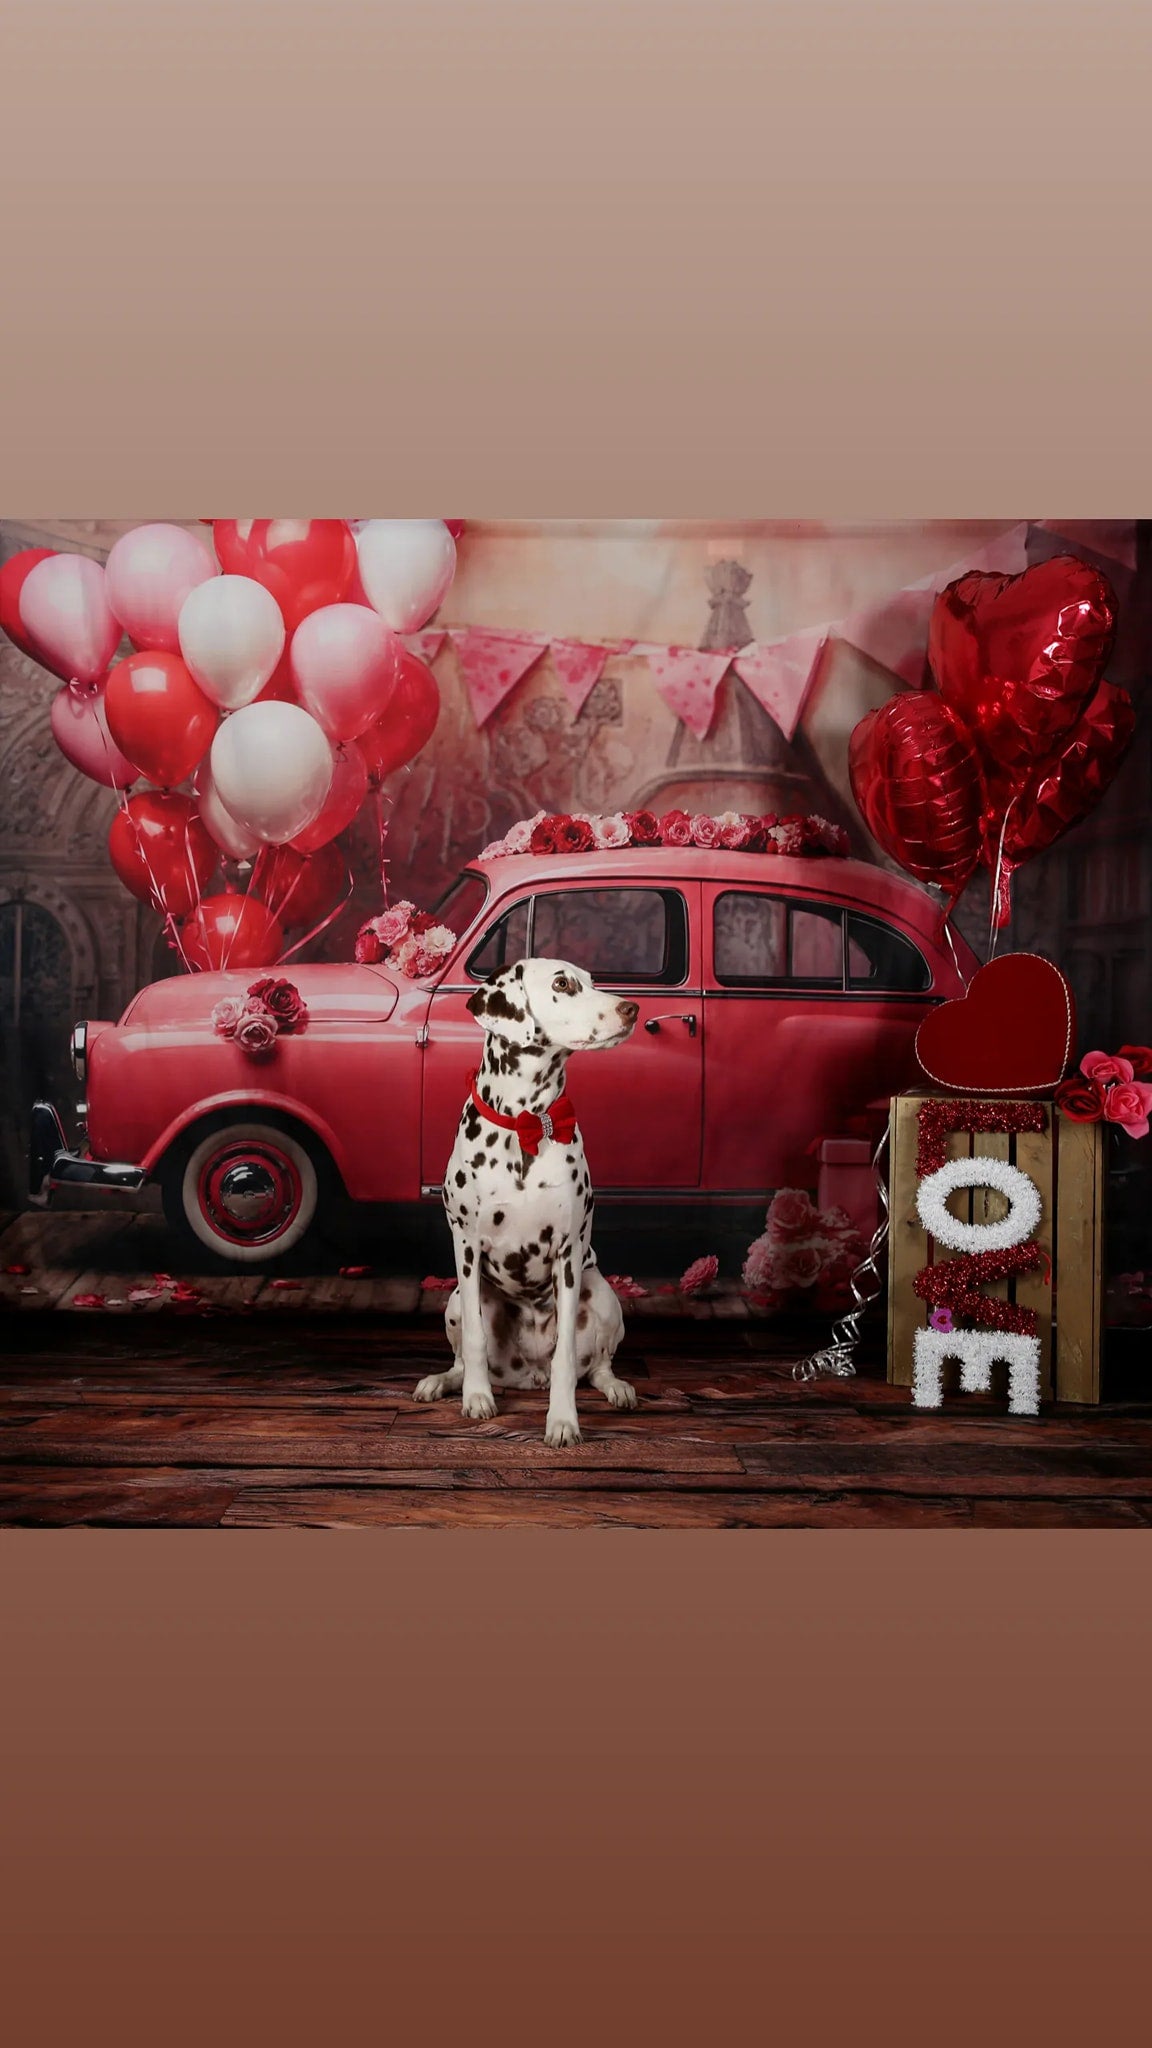 Kate Pet Valentine's Day Pink Car Balloon Backdrop Designed by Emetselch